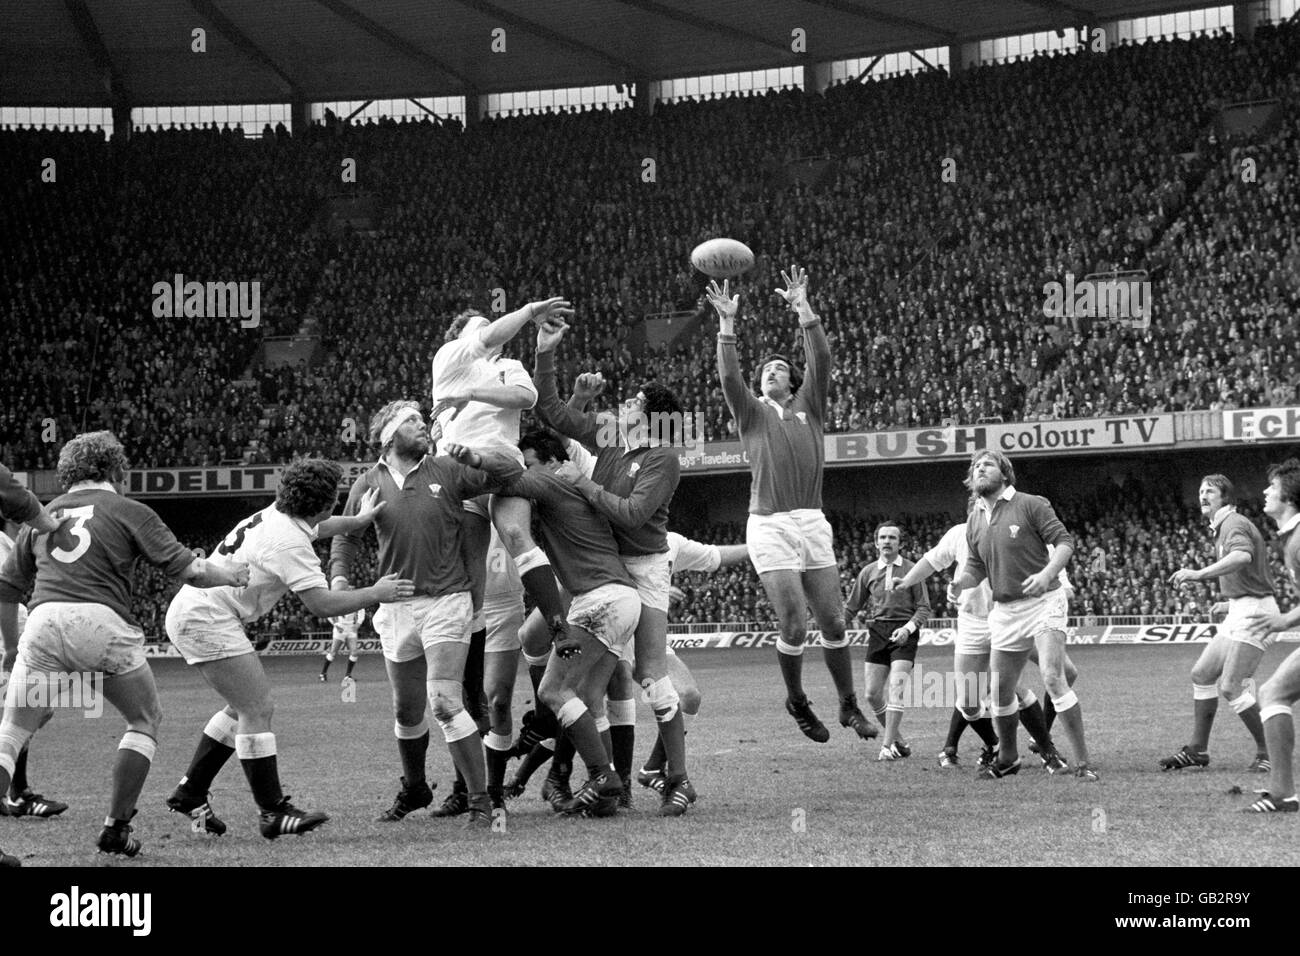 Rugby Union - Five Nations Championship - Wales v England - Cardiff Arms Park. England captain Bill Beaumont palms a lineout ball to Wales' Paul Ringer Stock Photo